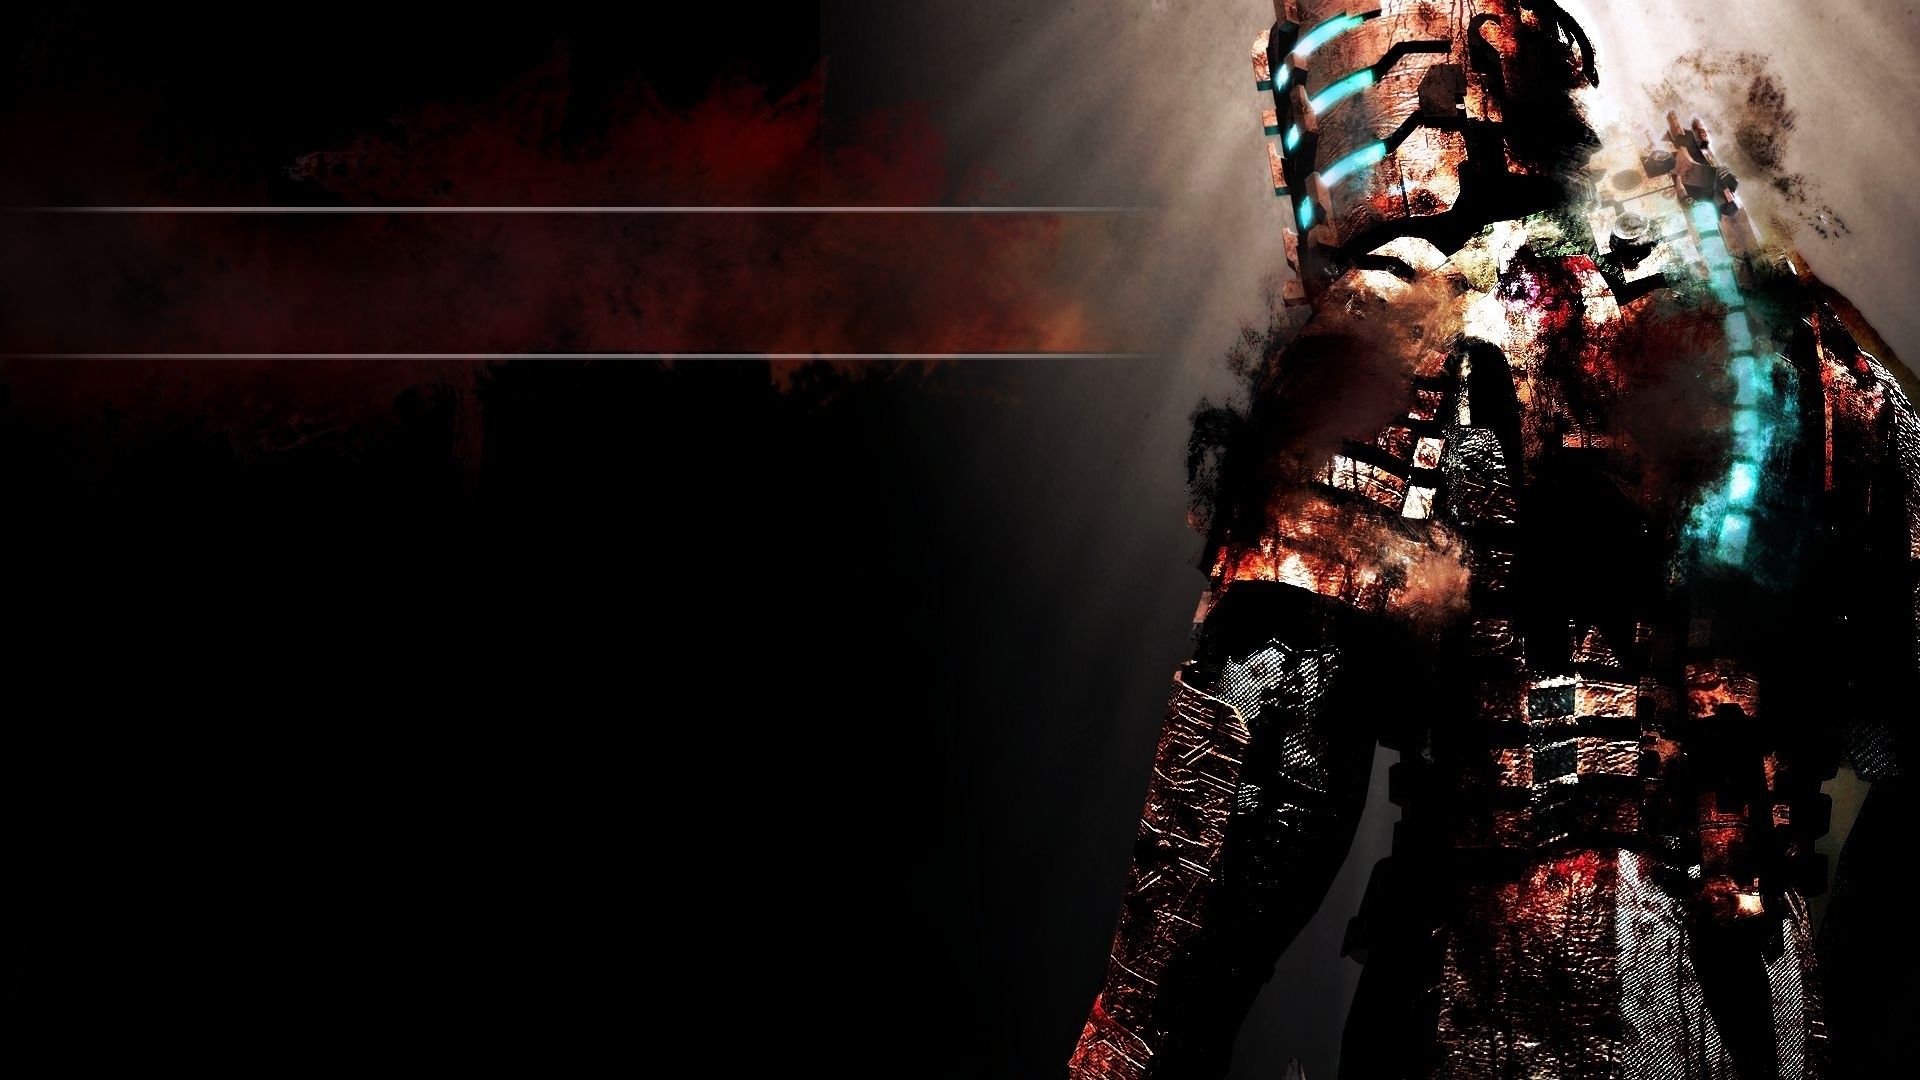 1920x1080 gore dead space badass game HD Wallpaper Space amp Planets 962271